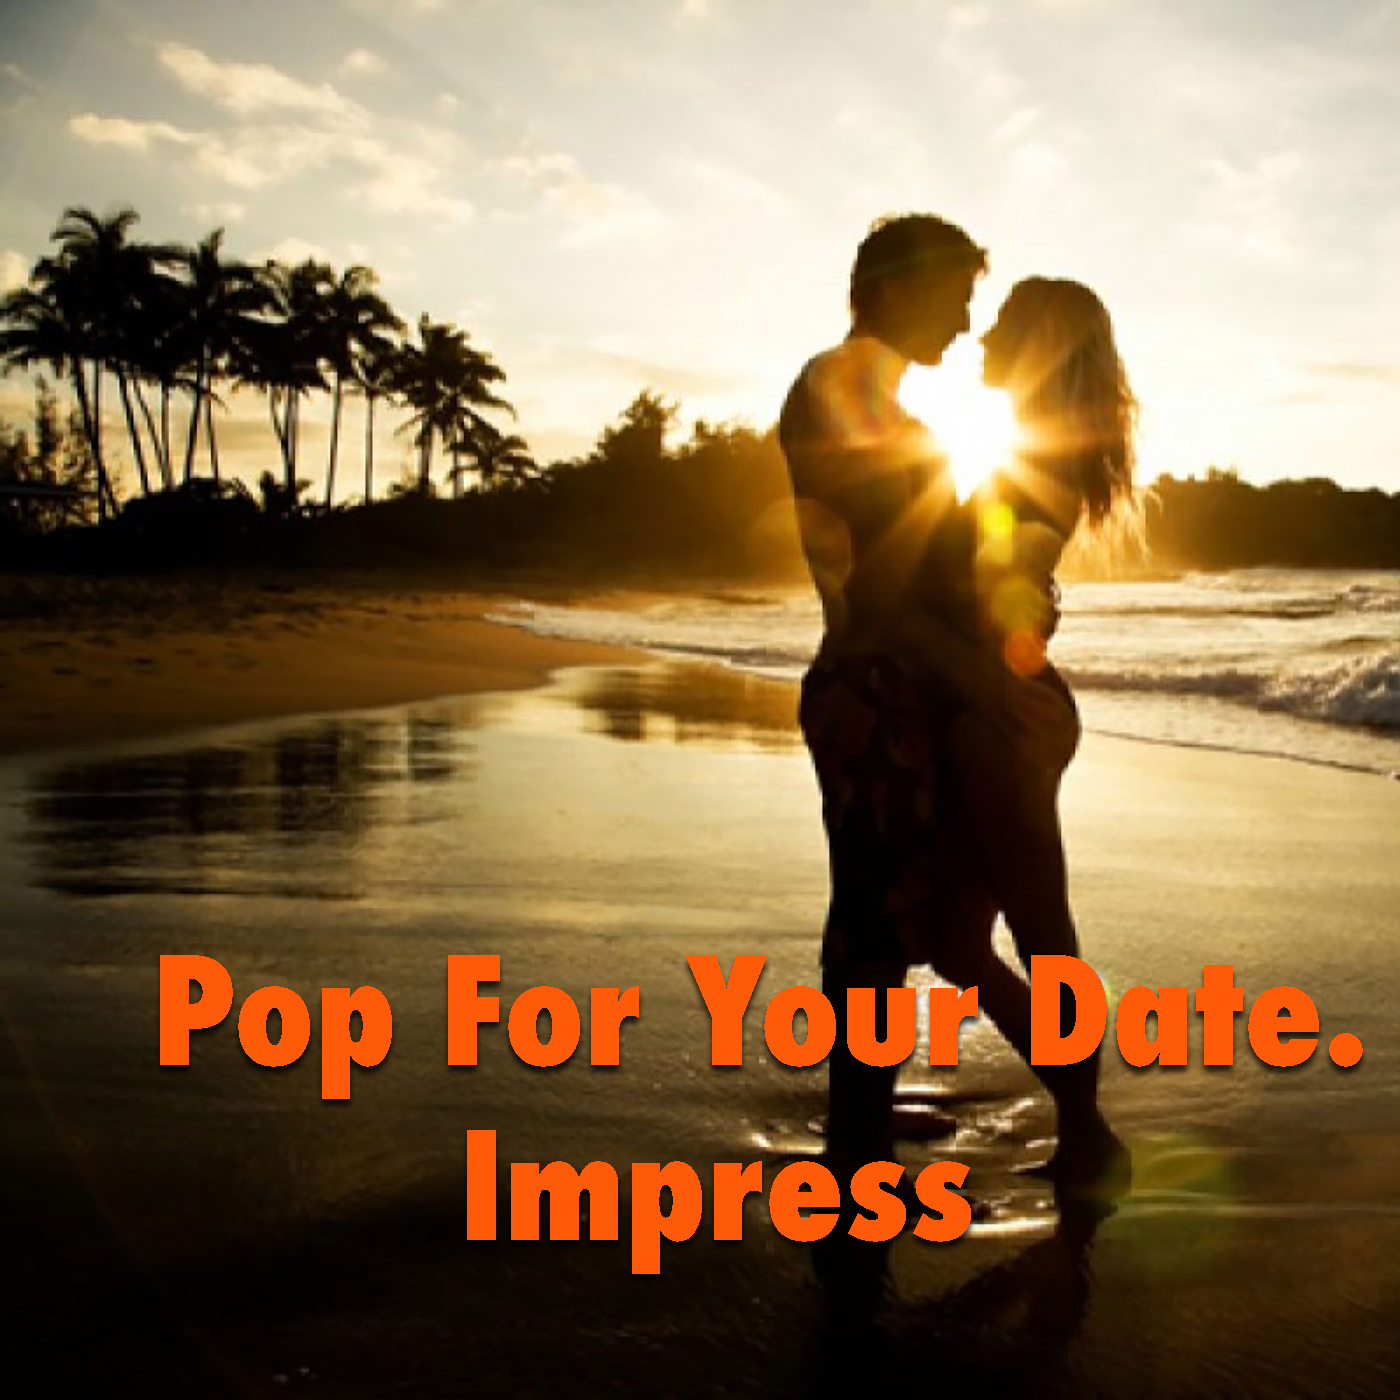 Pop For Your Date. Impress